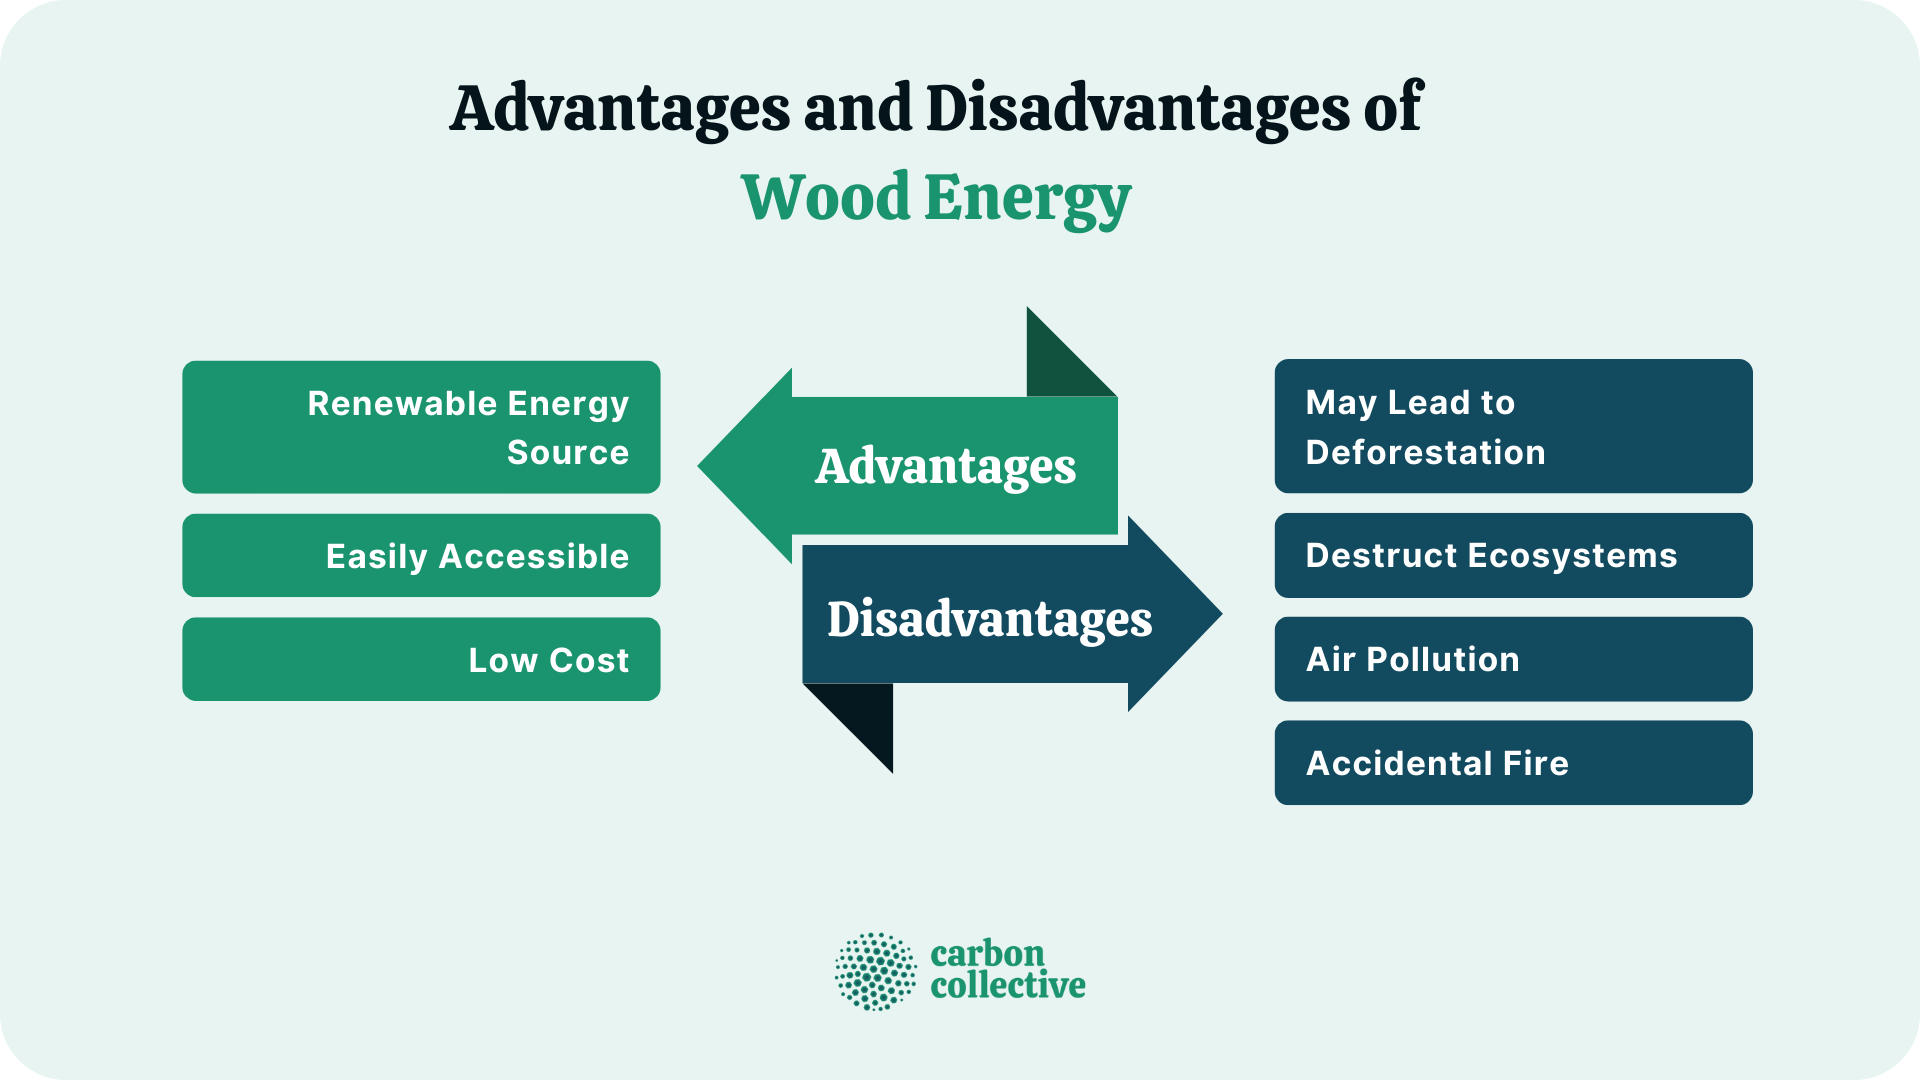 What are 4 disadvantages to using wood?